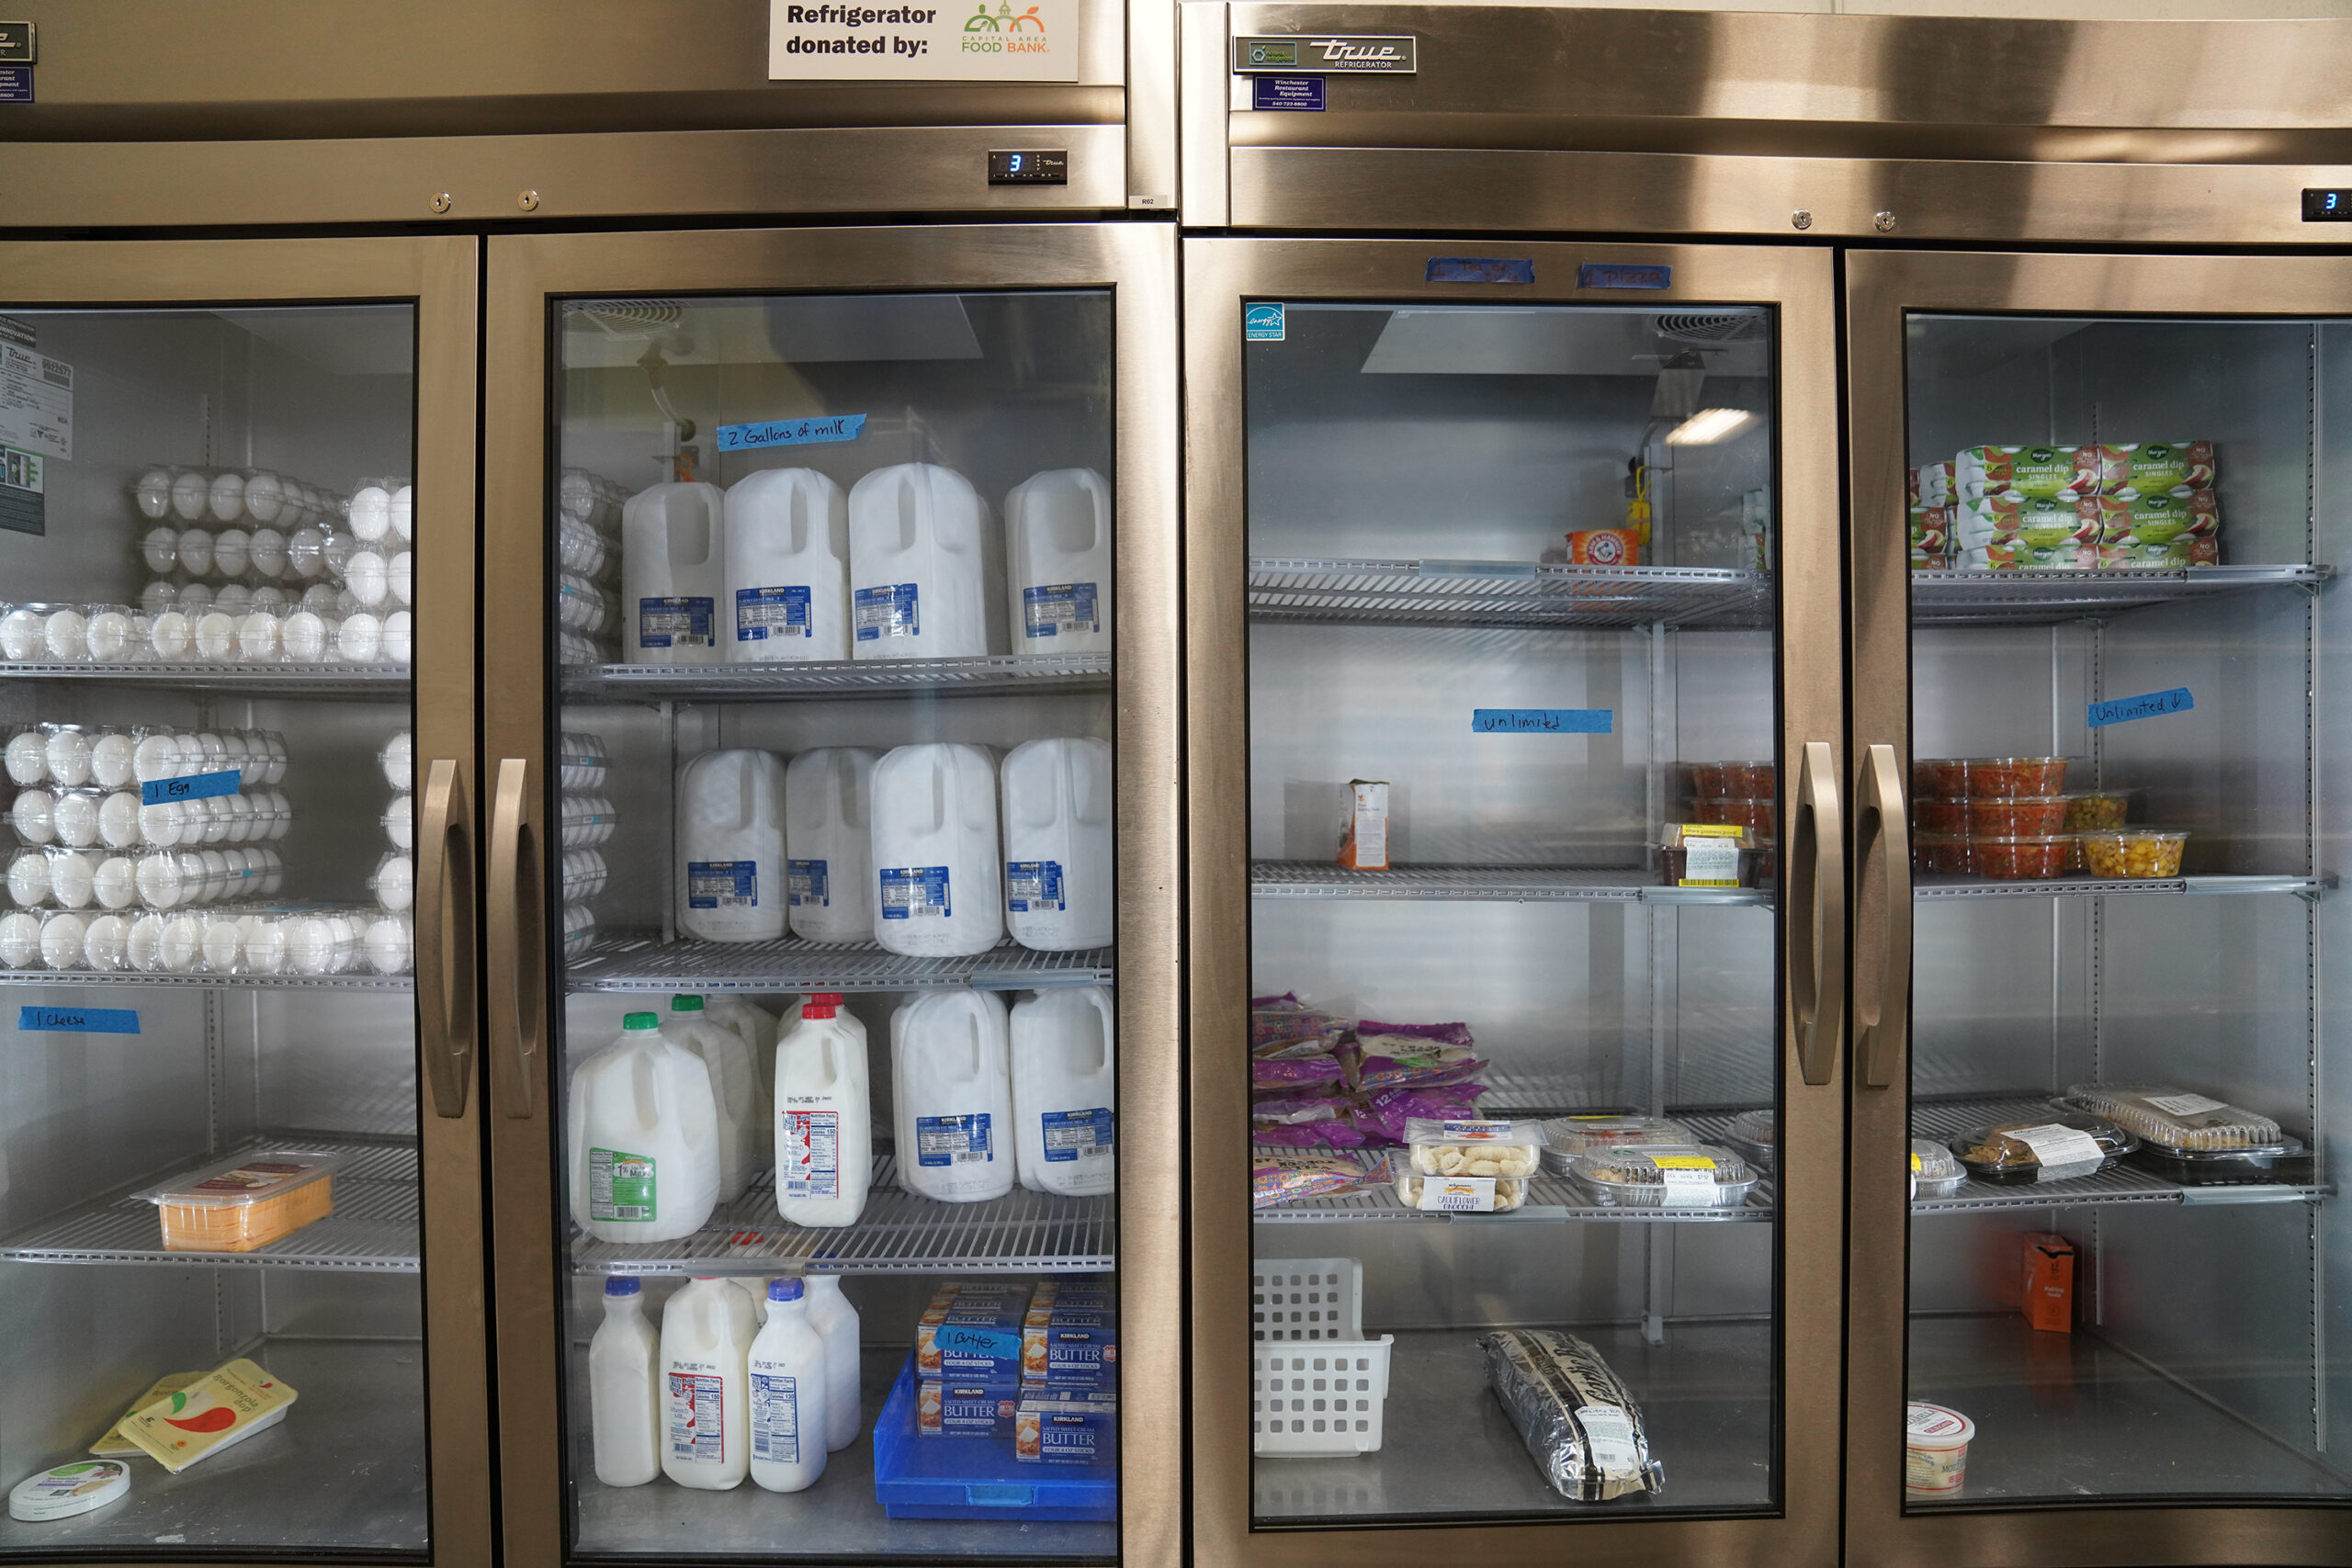 large industrial refrigerators filled with milk, eggs and other food